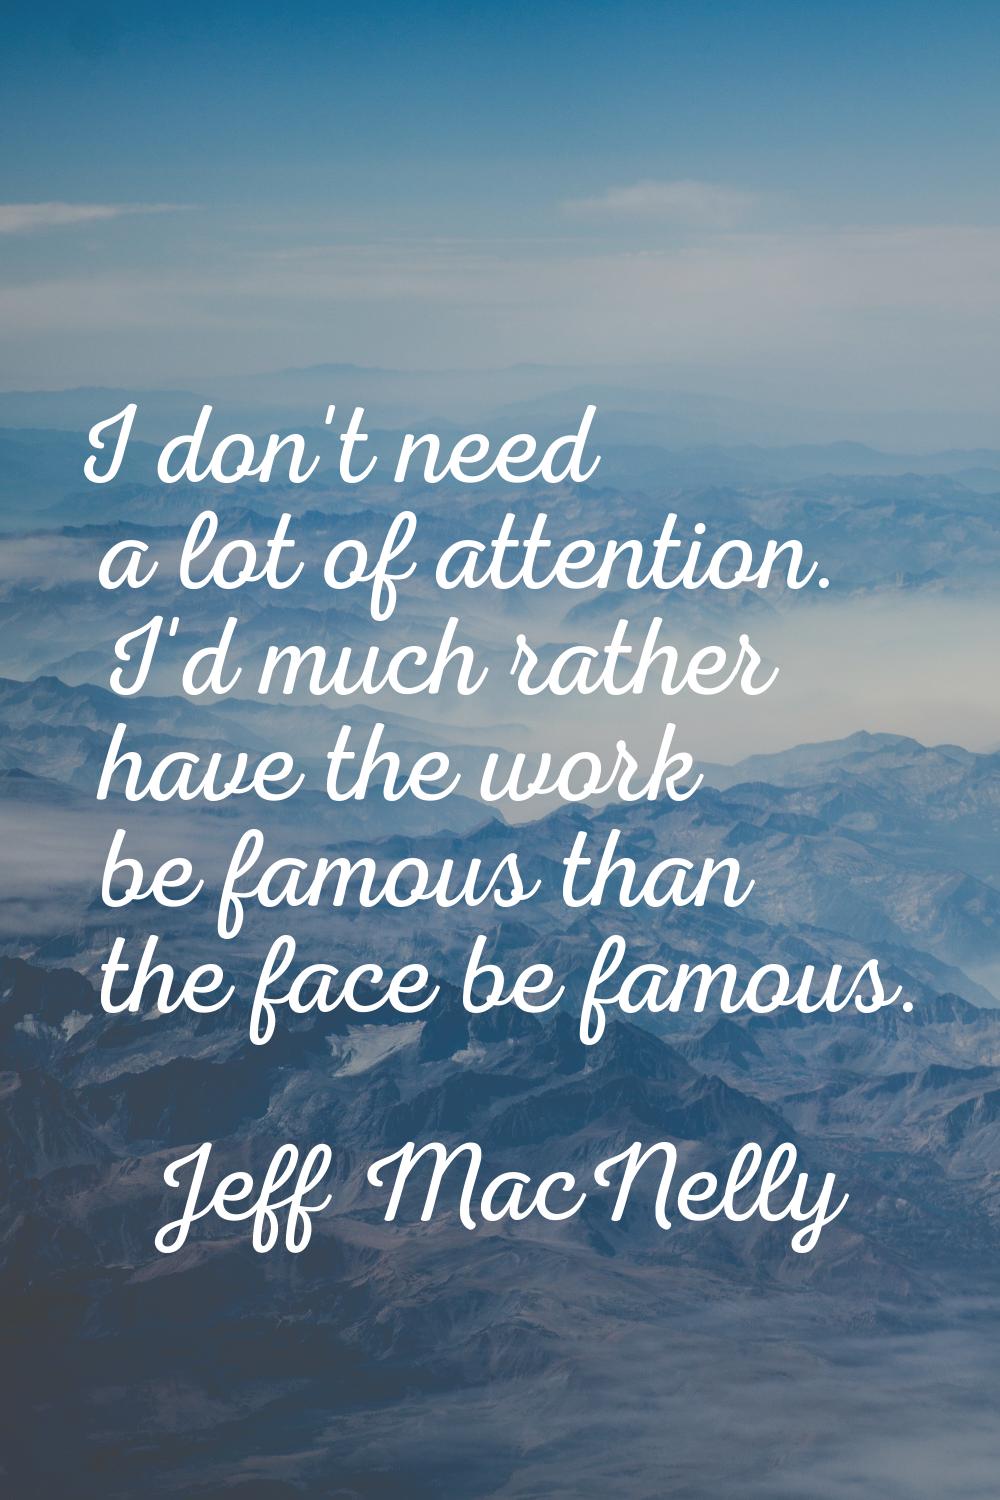 I don't need a lot of attention. I'd much rather have the work be famous than the face be famous.